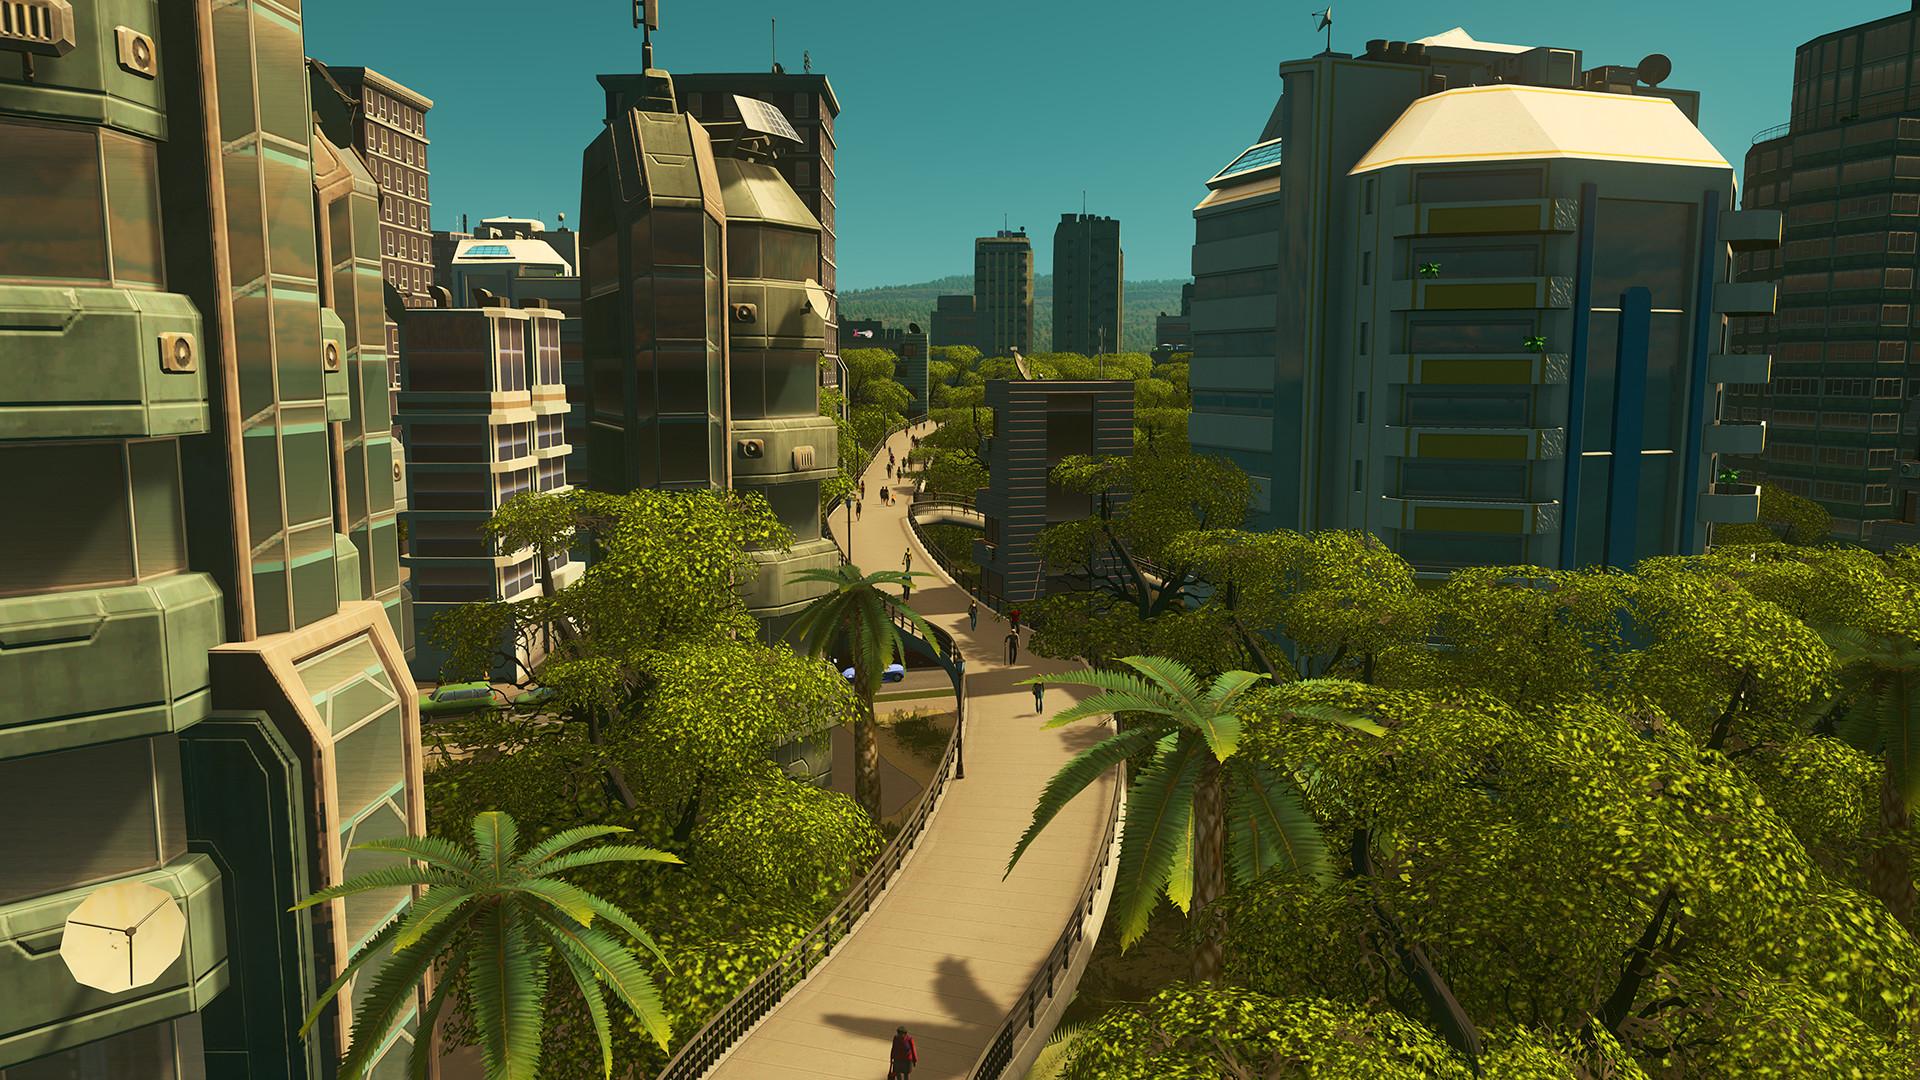 Screenshot №7 from game Cities: Skylines